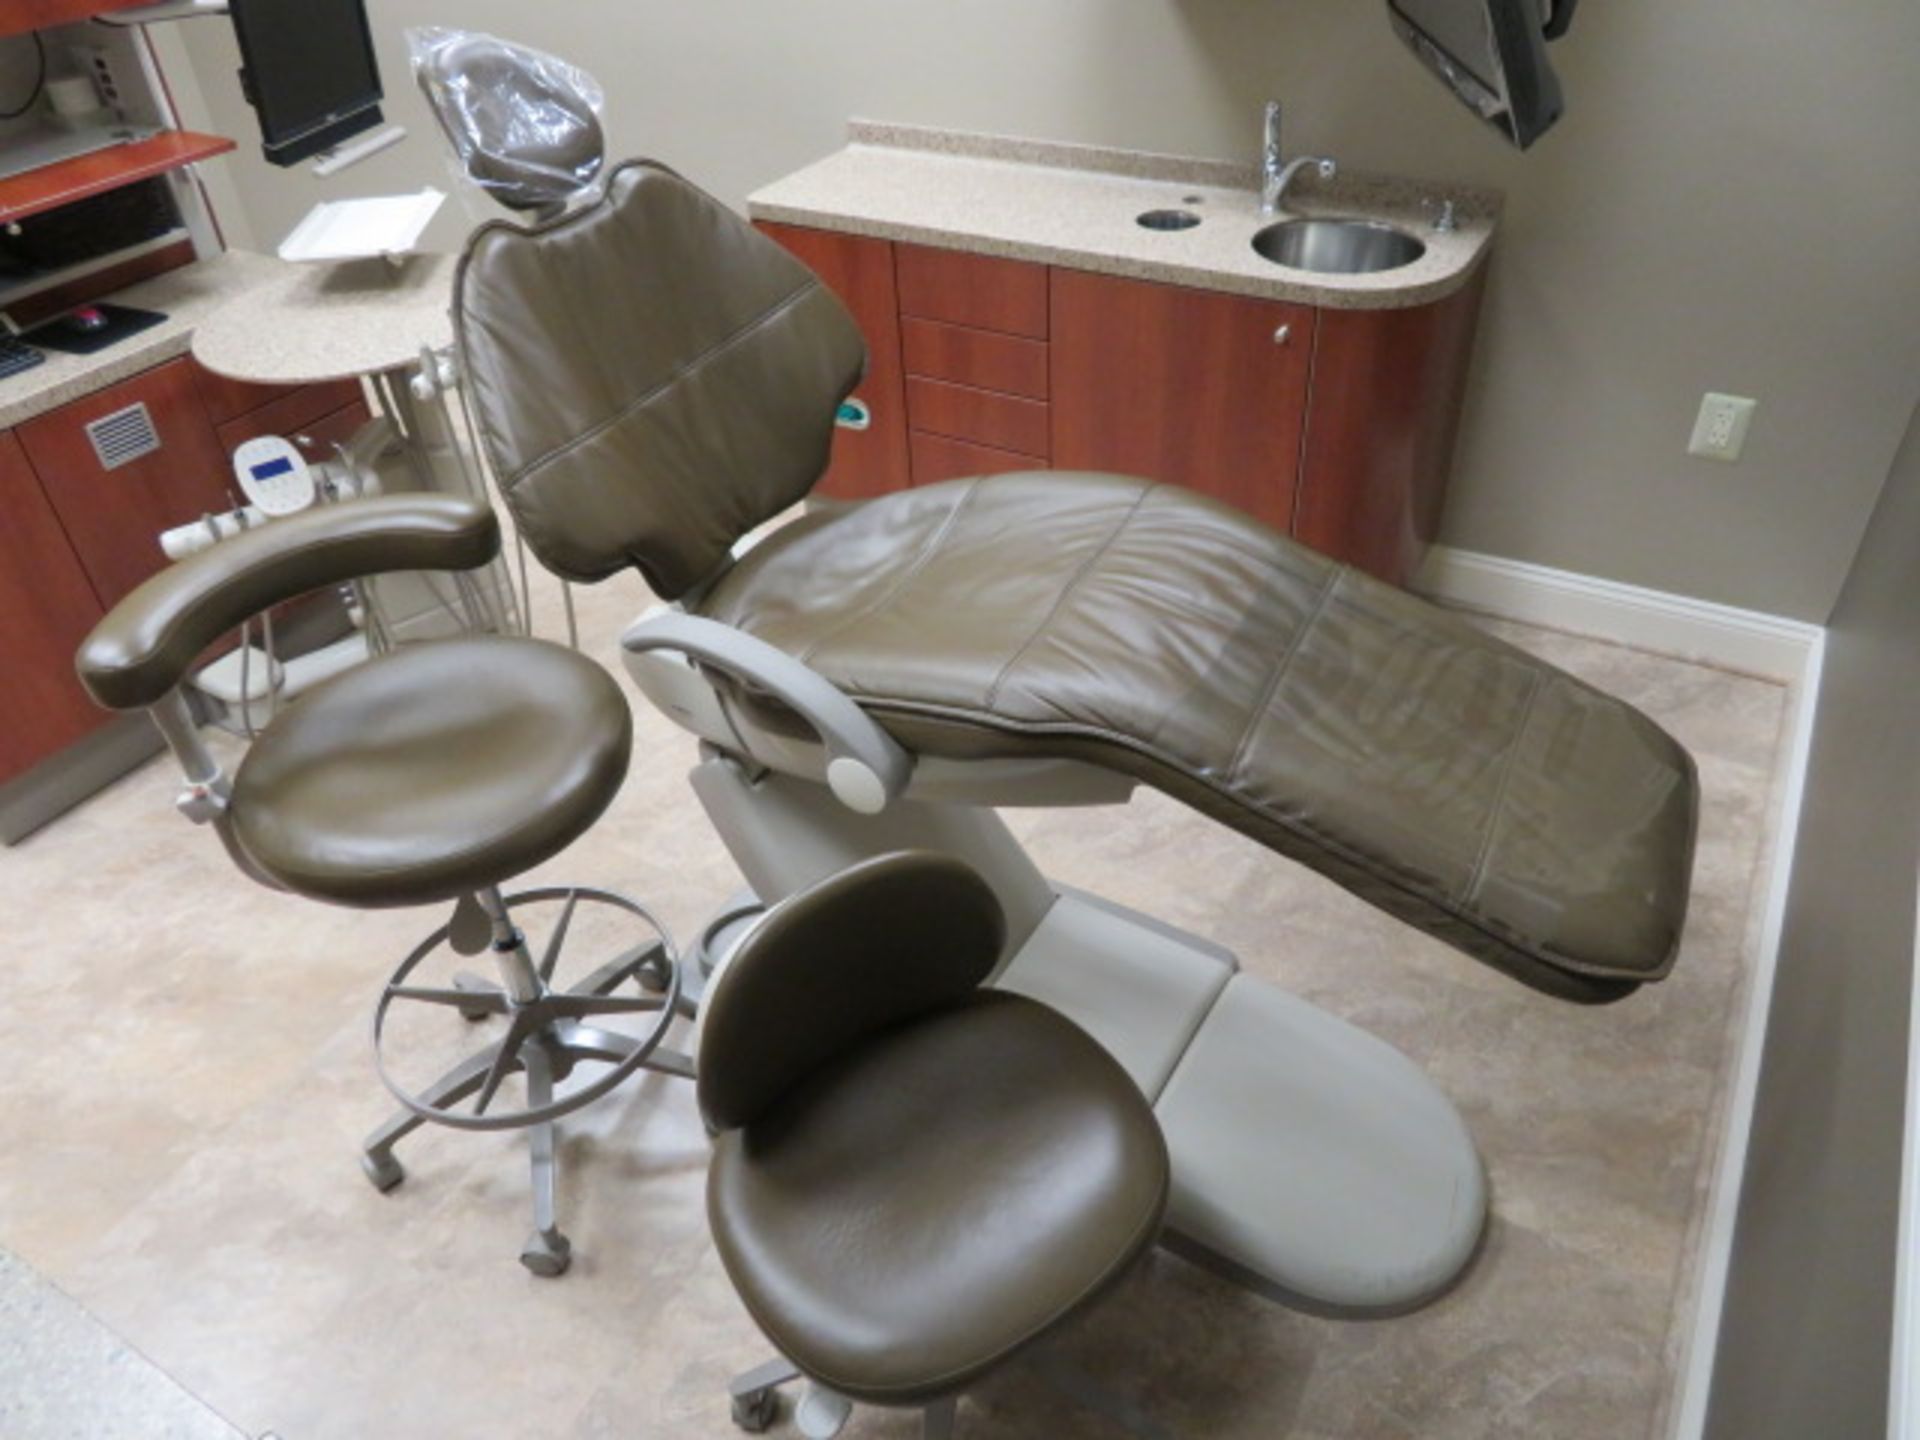 ADEC 511 SERIES DENTAL CHAIR, 541 DUO REAR-DELIVERY UNIT, 5580 CABINET, 5531/5730 SINK W/ CABINET - Image 2 of 4